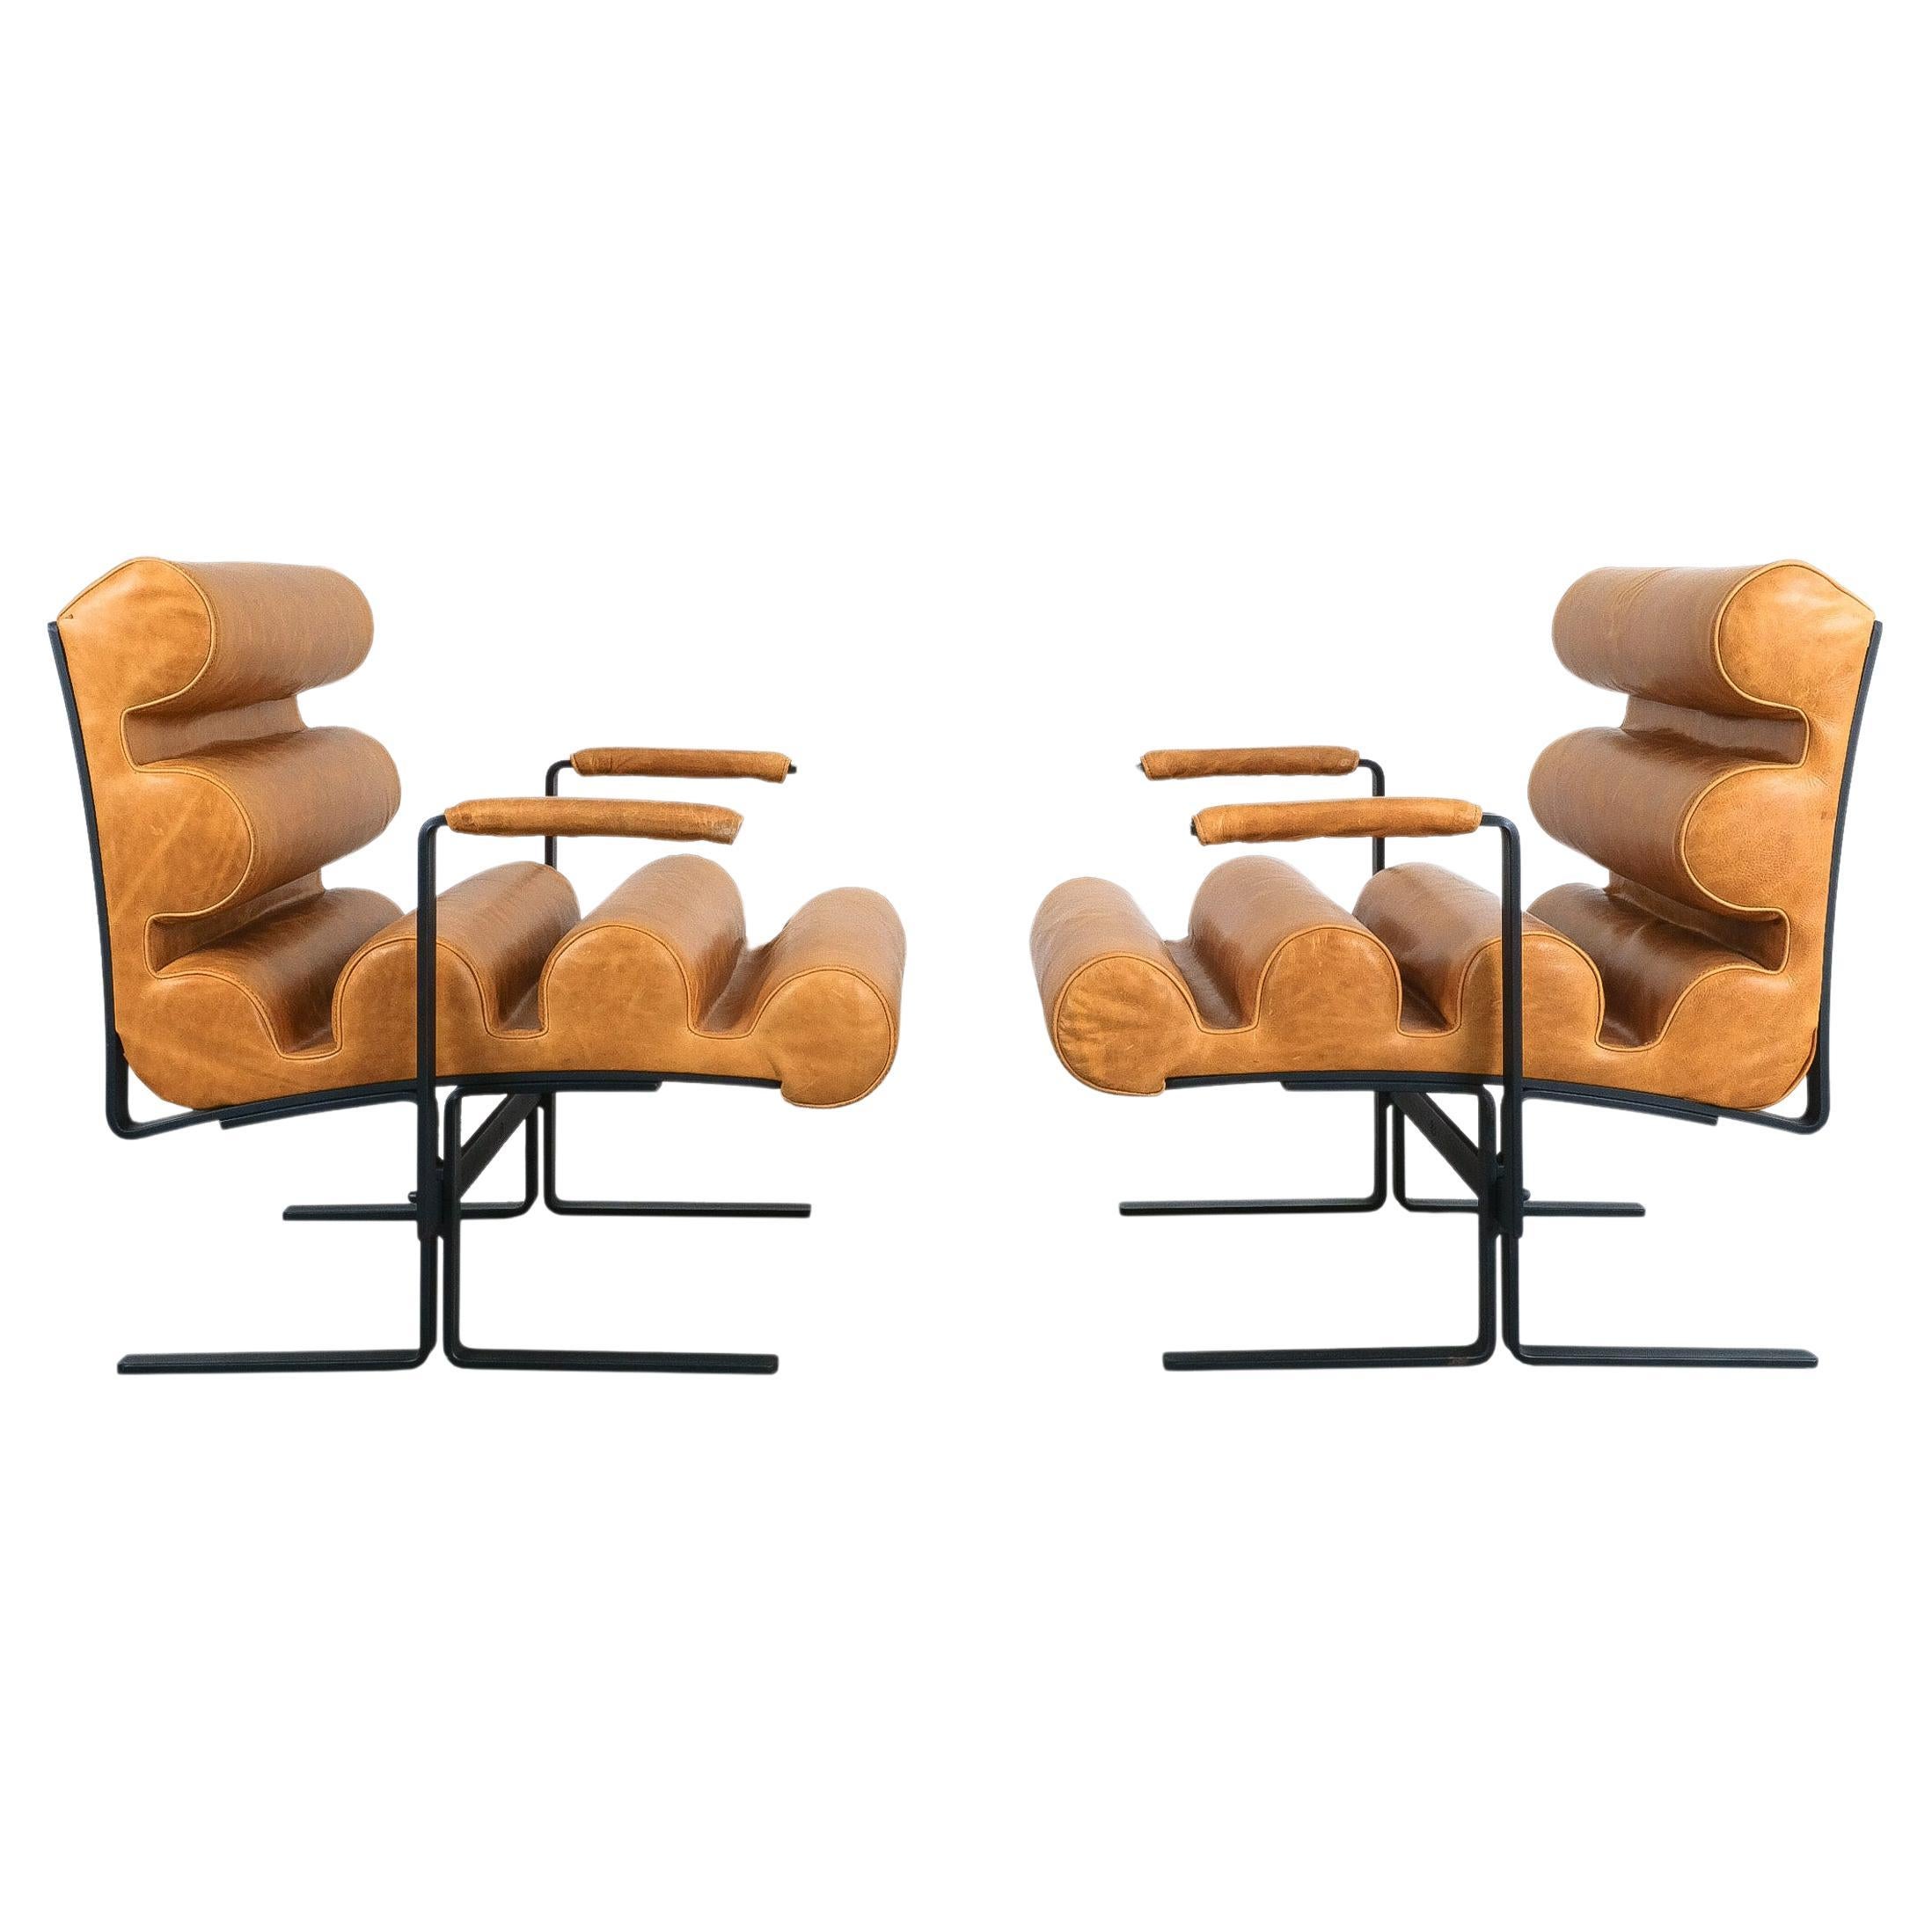 Joe Colombo For Sormani Roll Brown Leather Spring Steel Armchair Pair (2) , 1962 For Sale